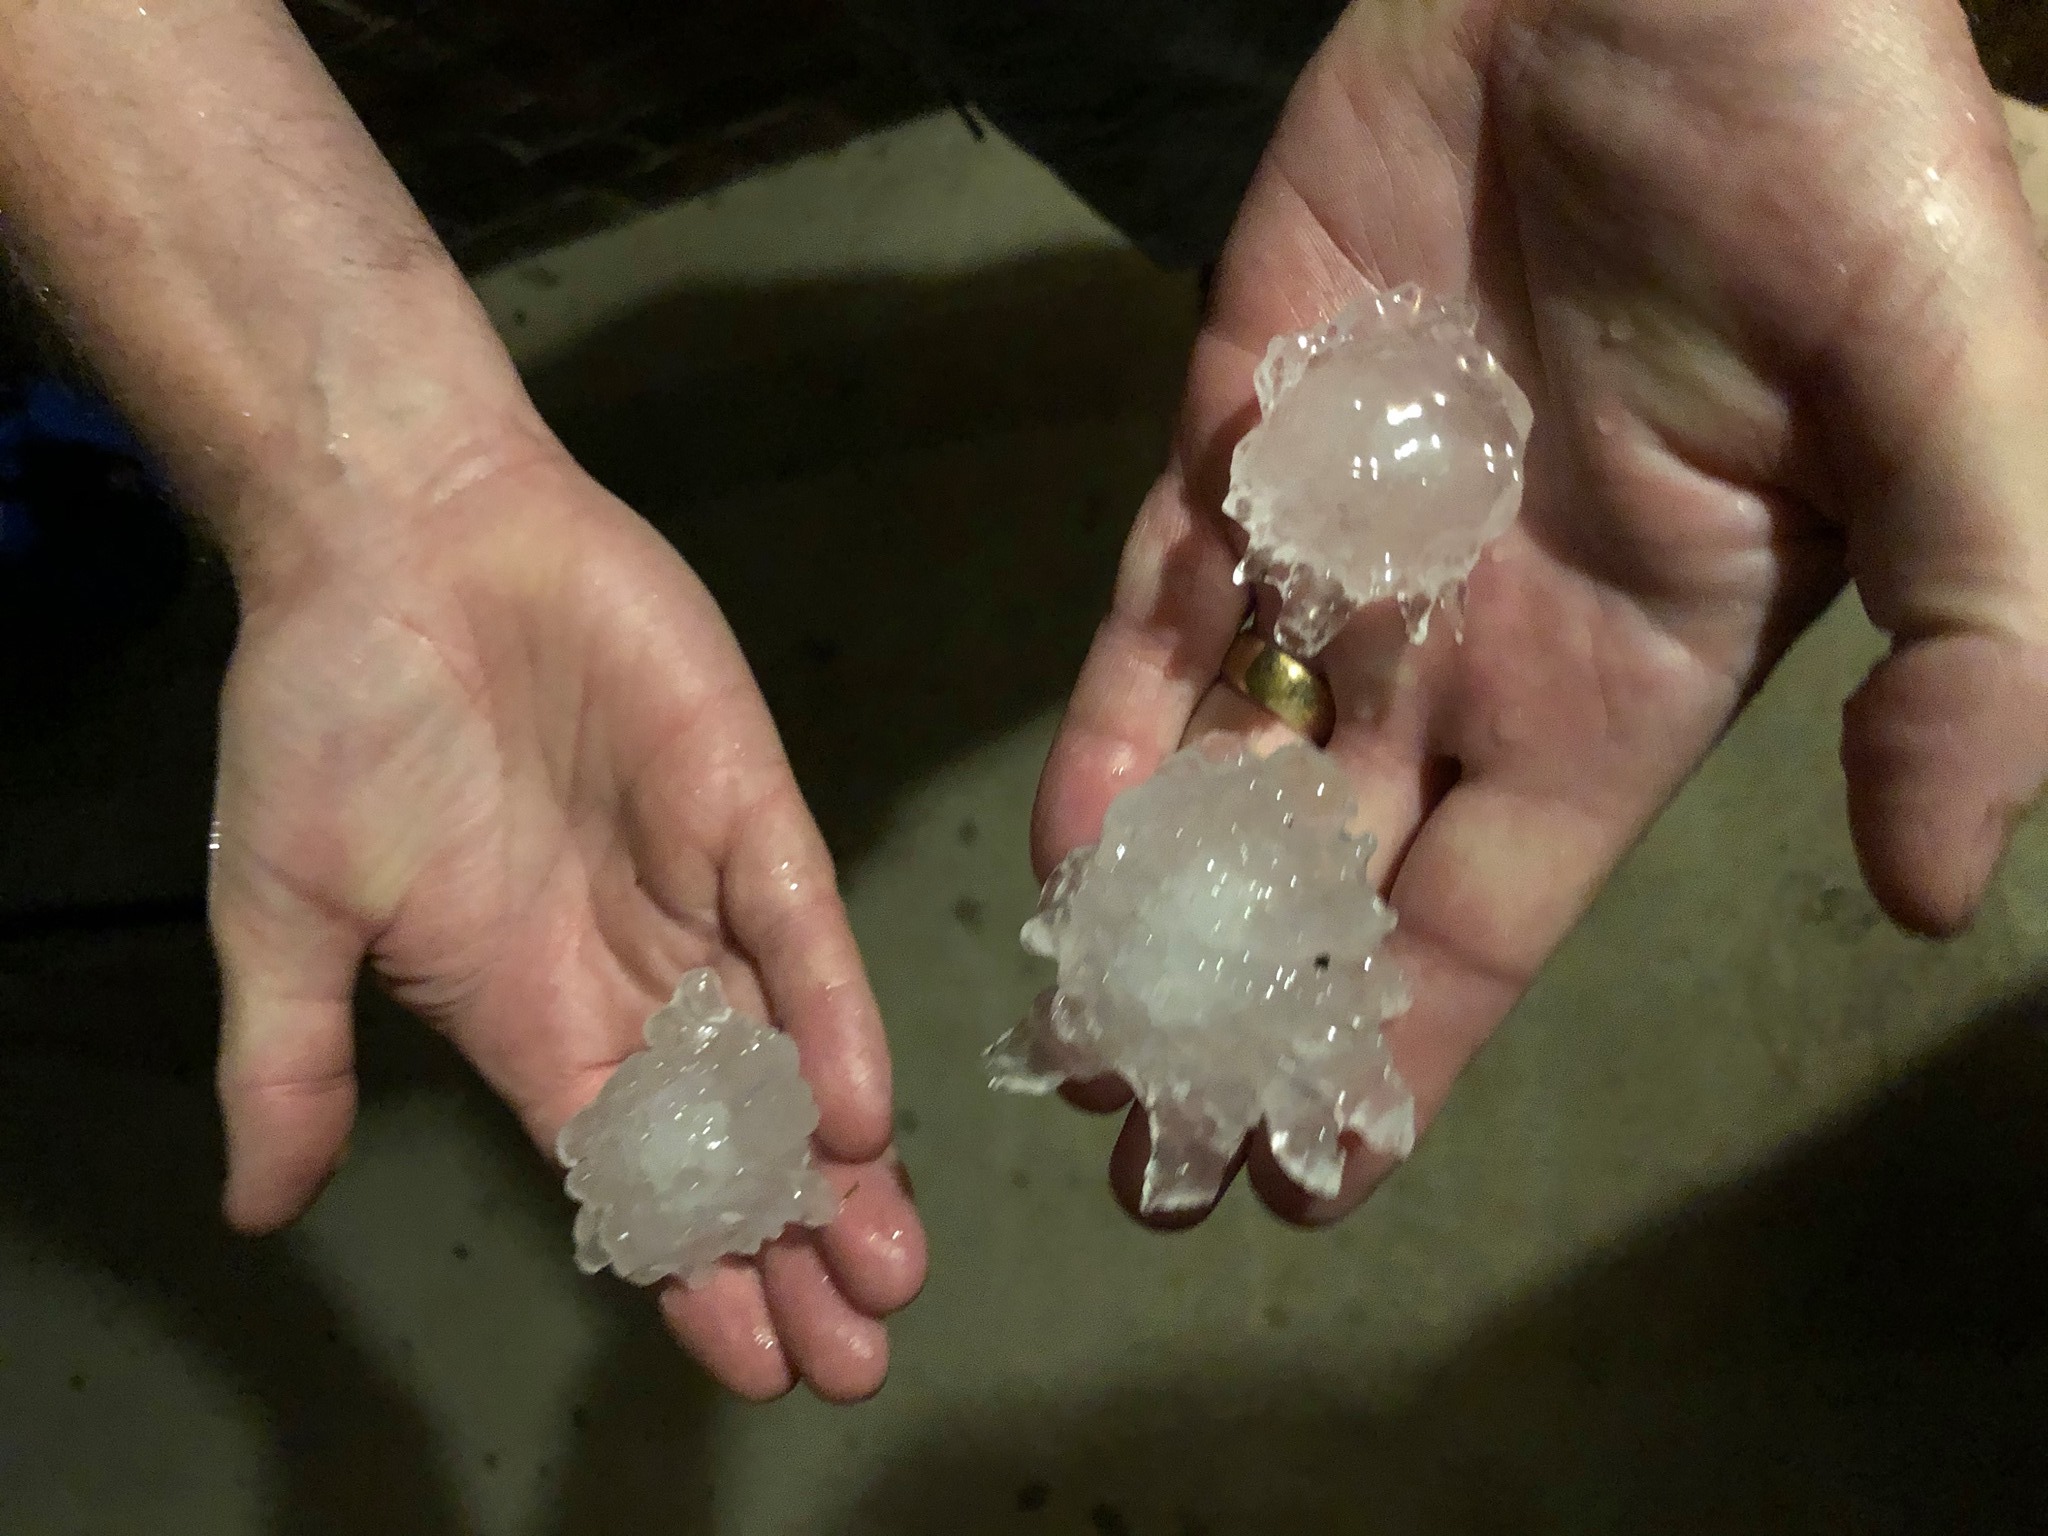 Large 2” hailstones produced by Texas storm.